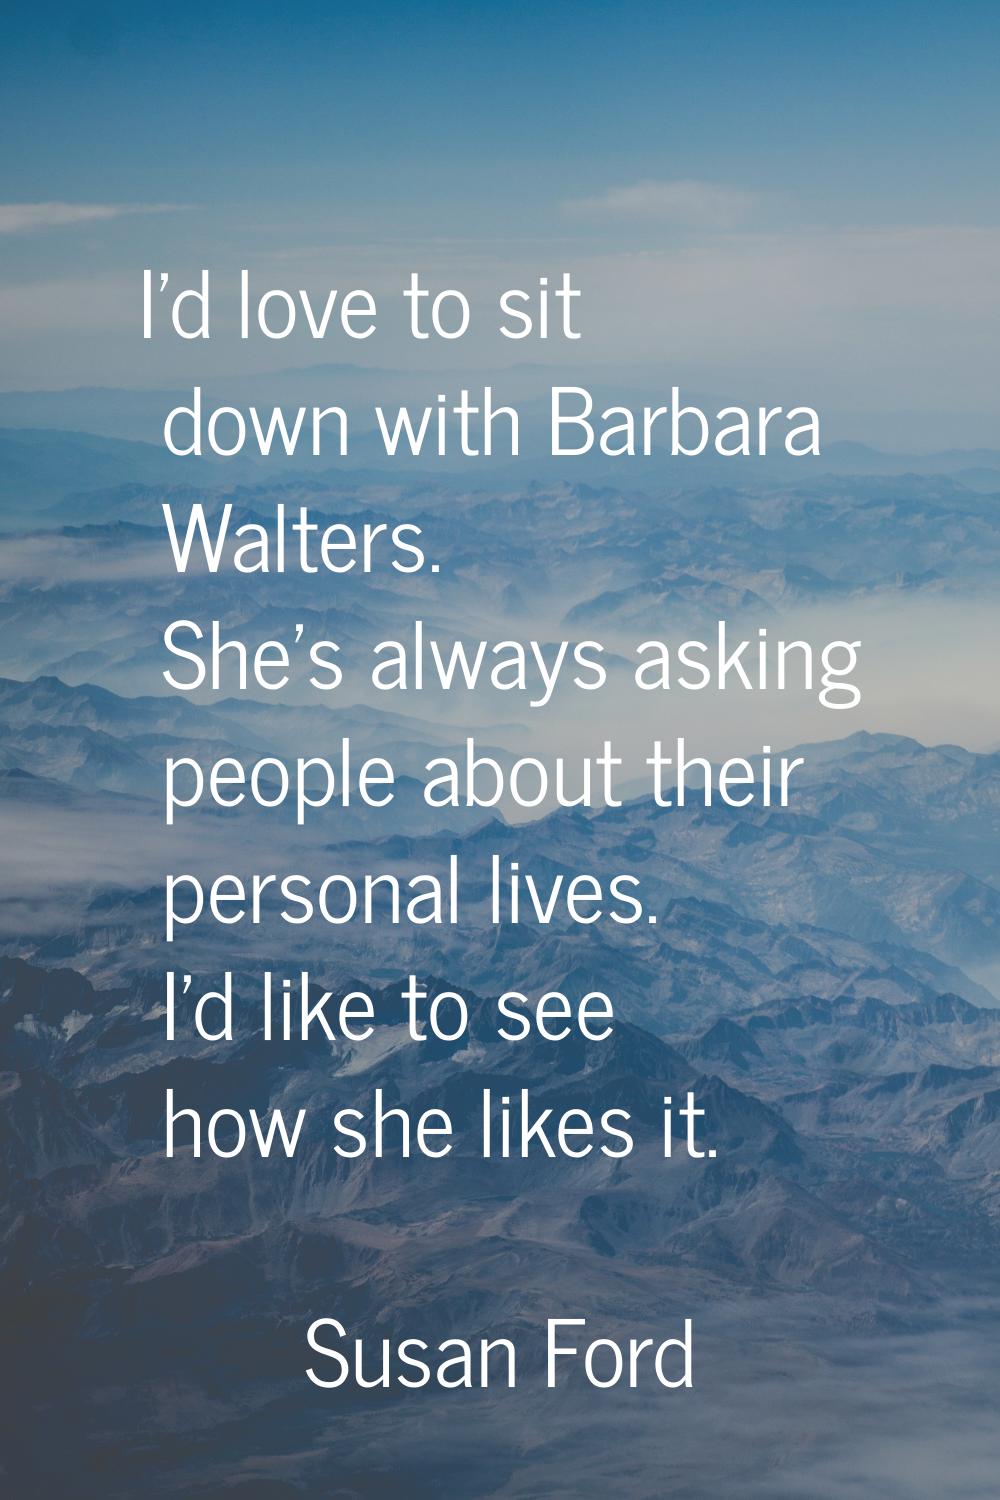 I'd love to sit down with Barbara Walters. She's always asking people about their personal lives. I